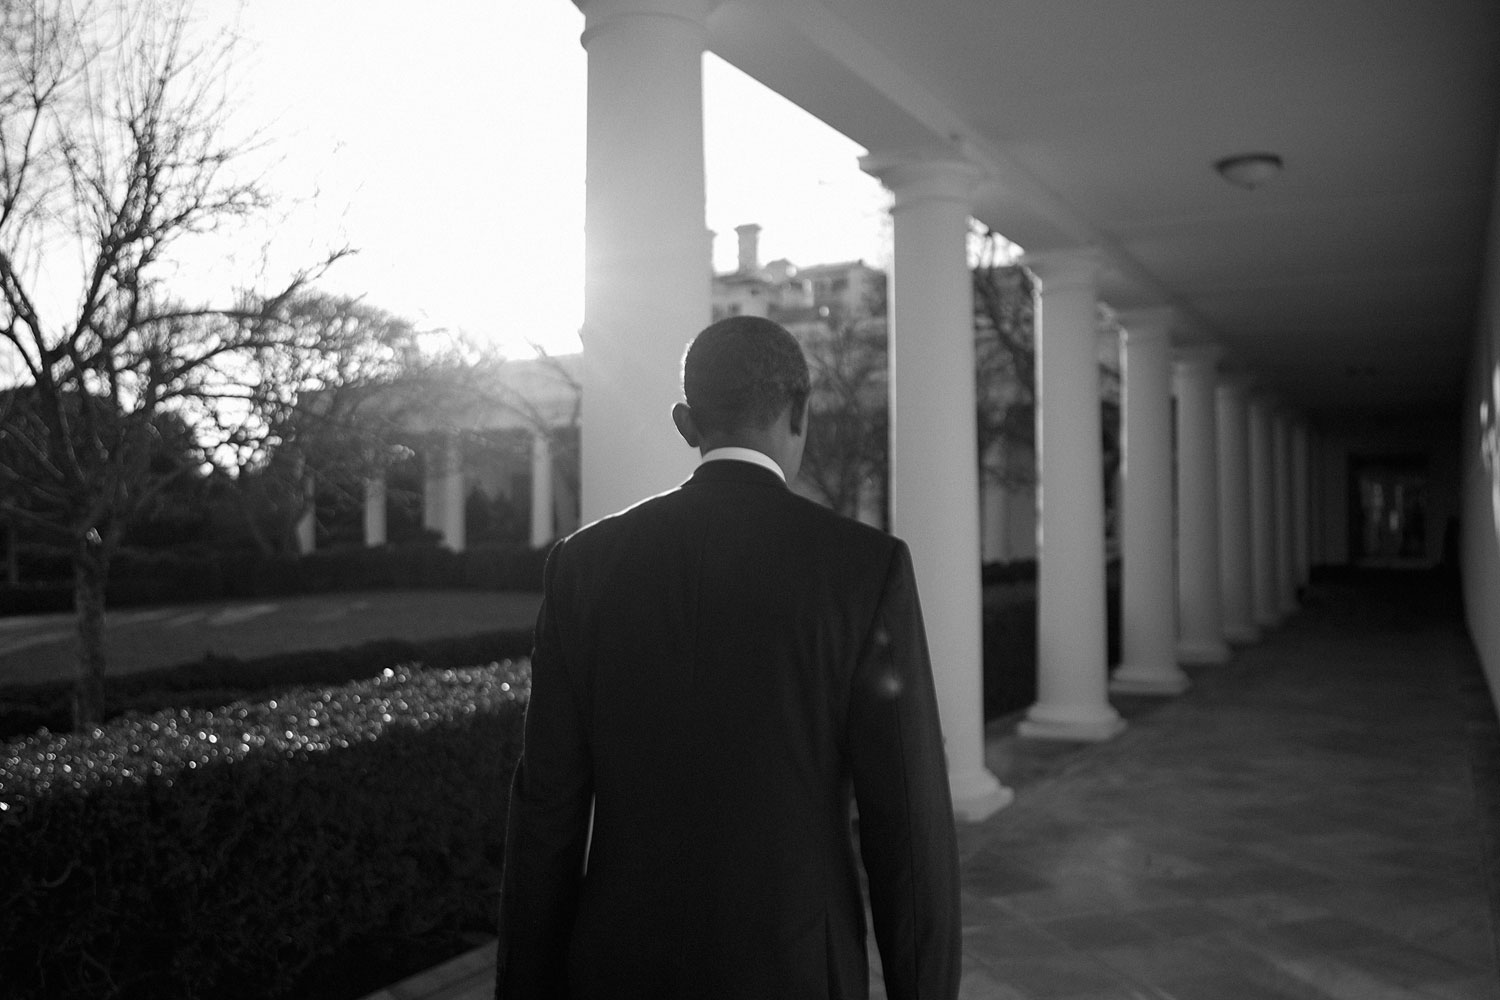 January 17, 2012. President Obama walks back to the Oval Office.